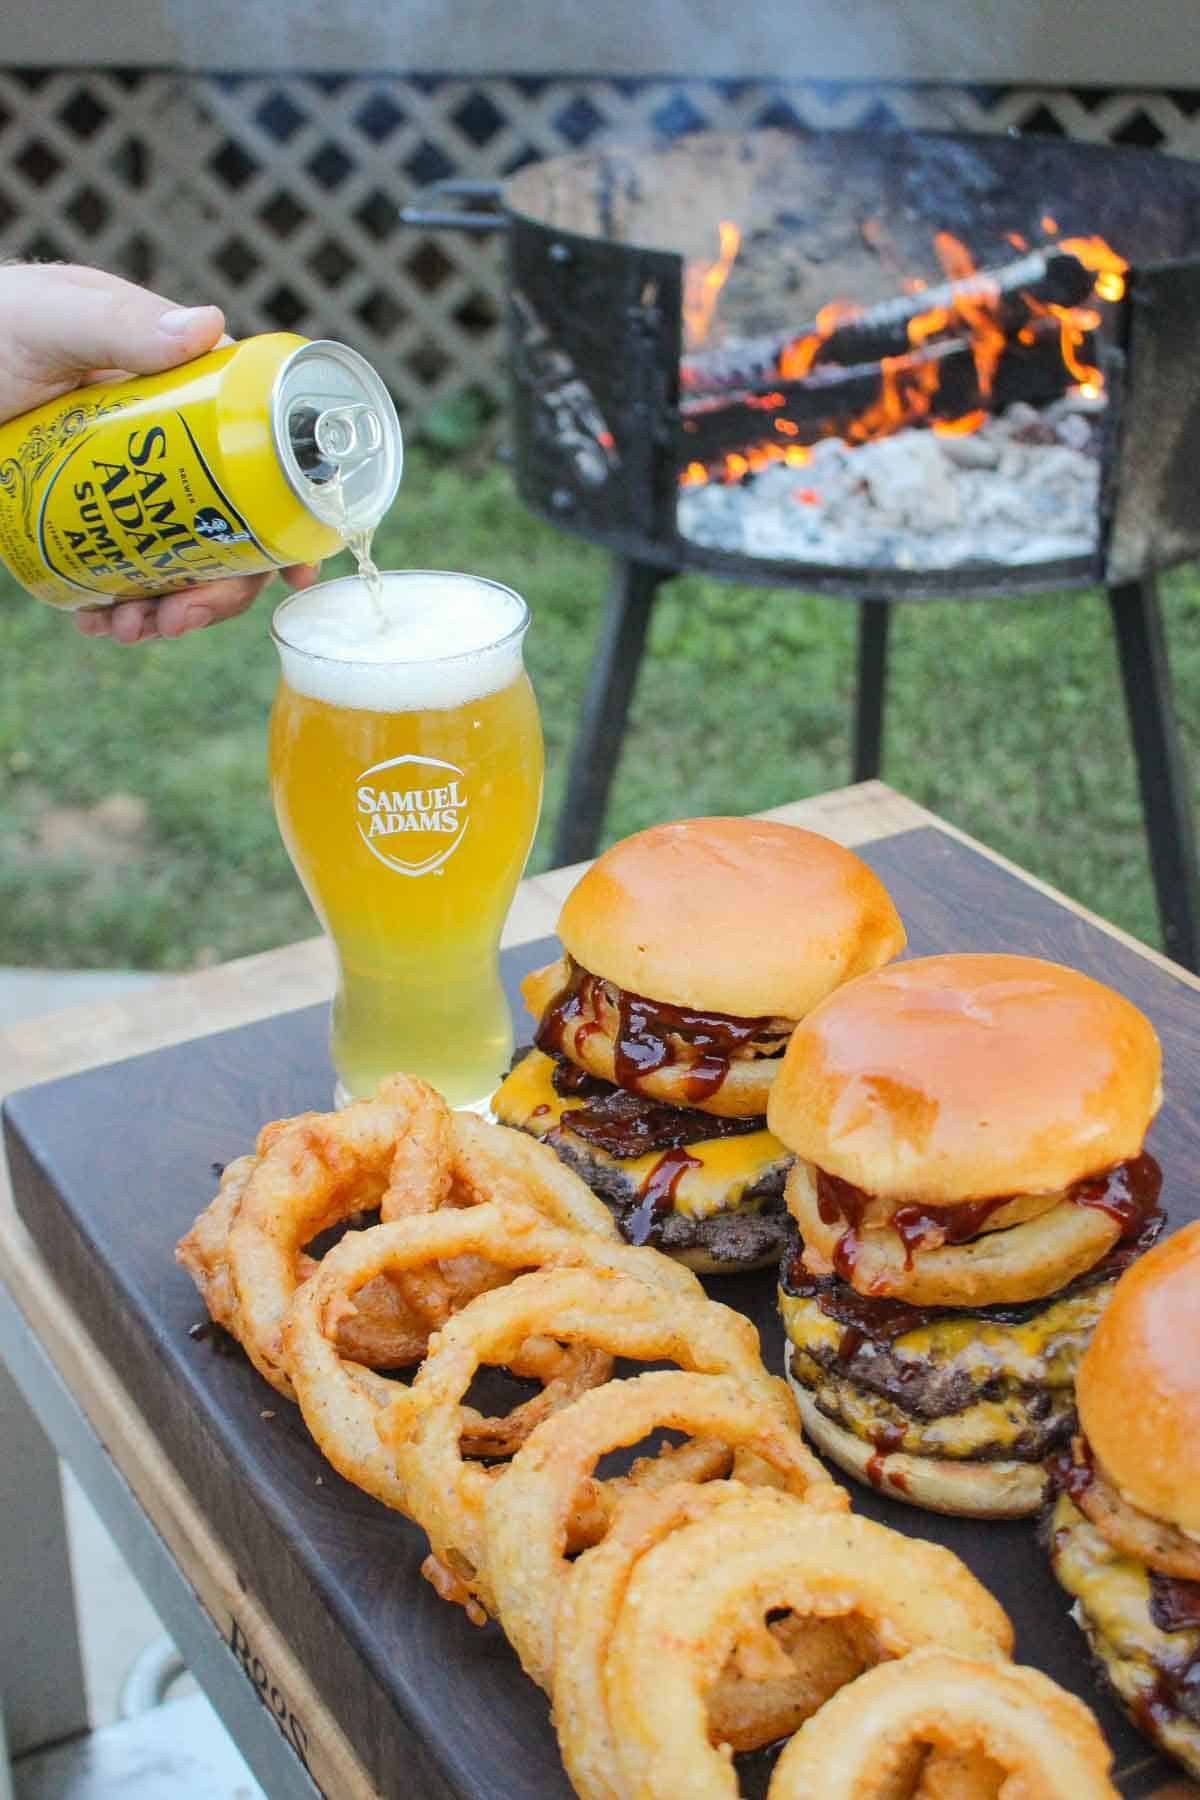 BBQ bacon burgers with onion rings and Samuel Adams Summer Ale.